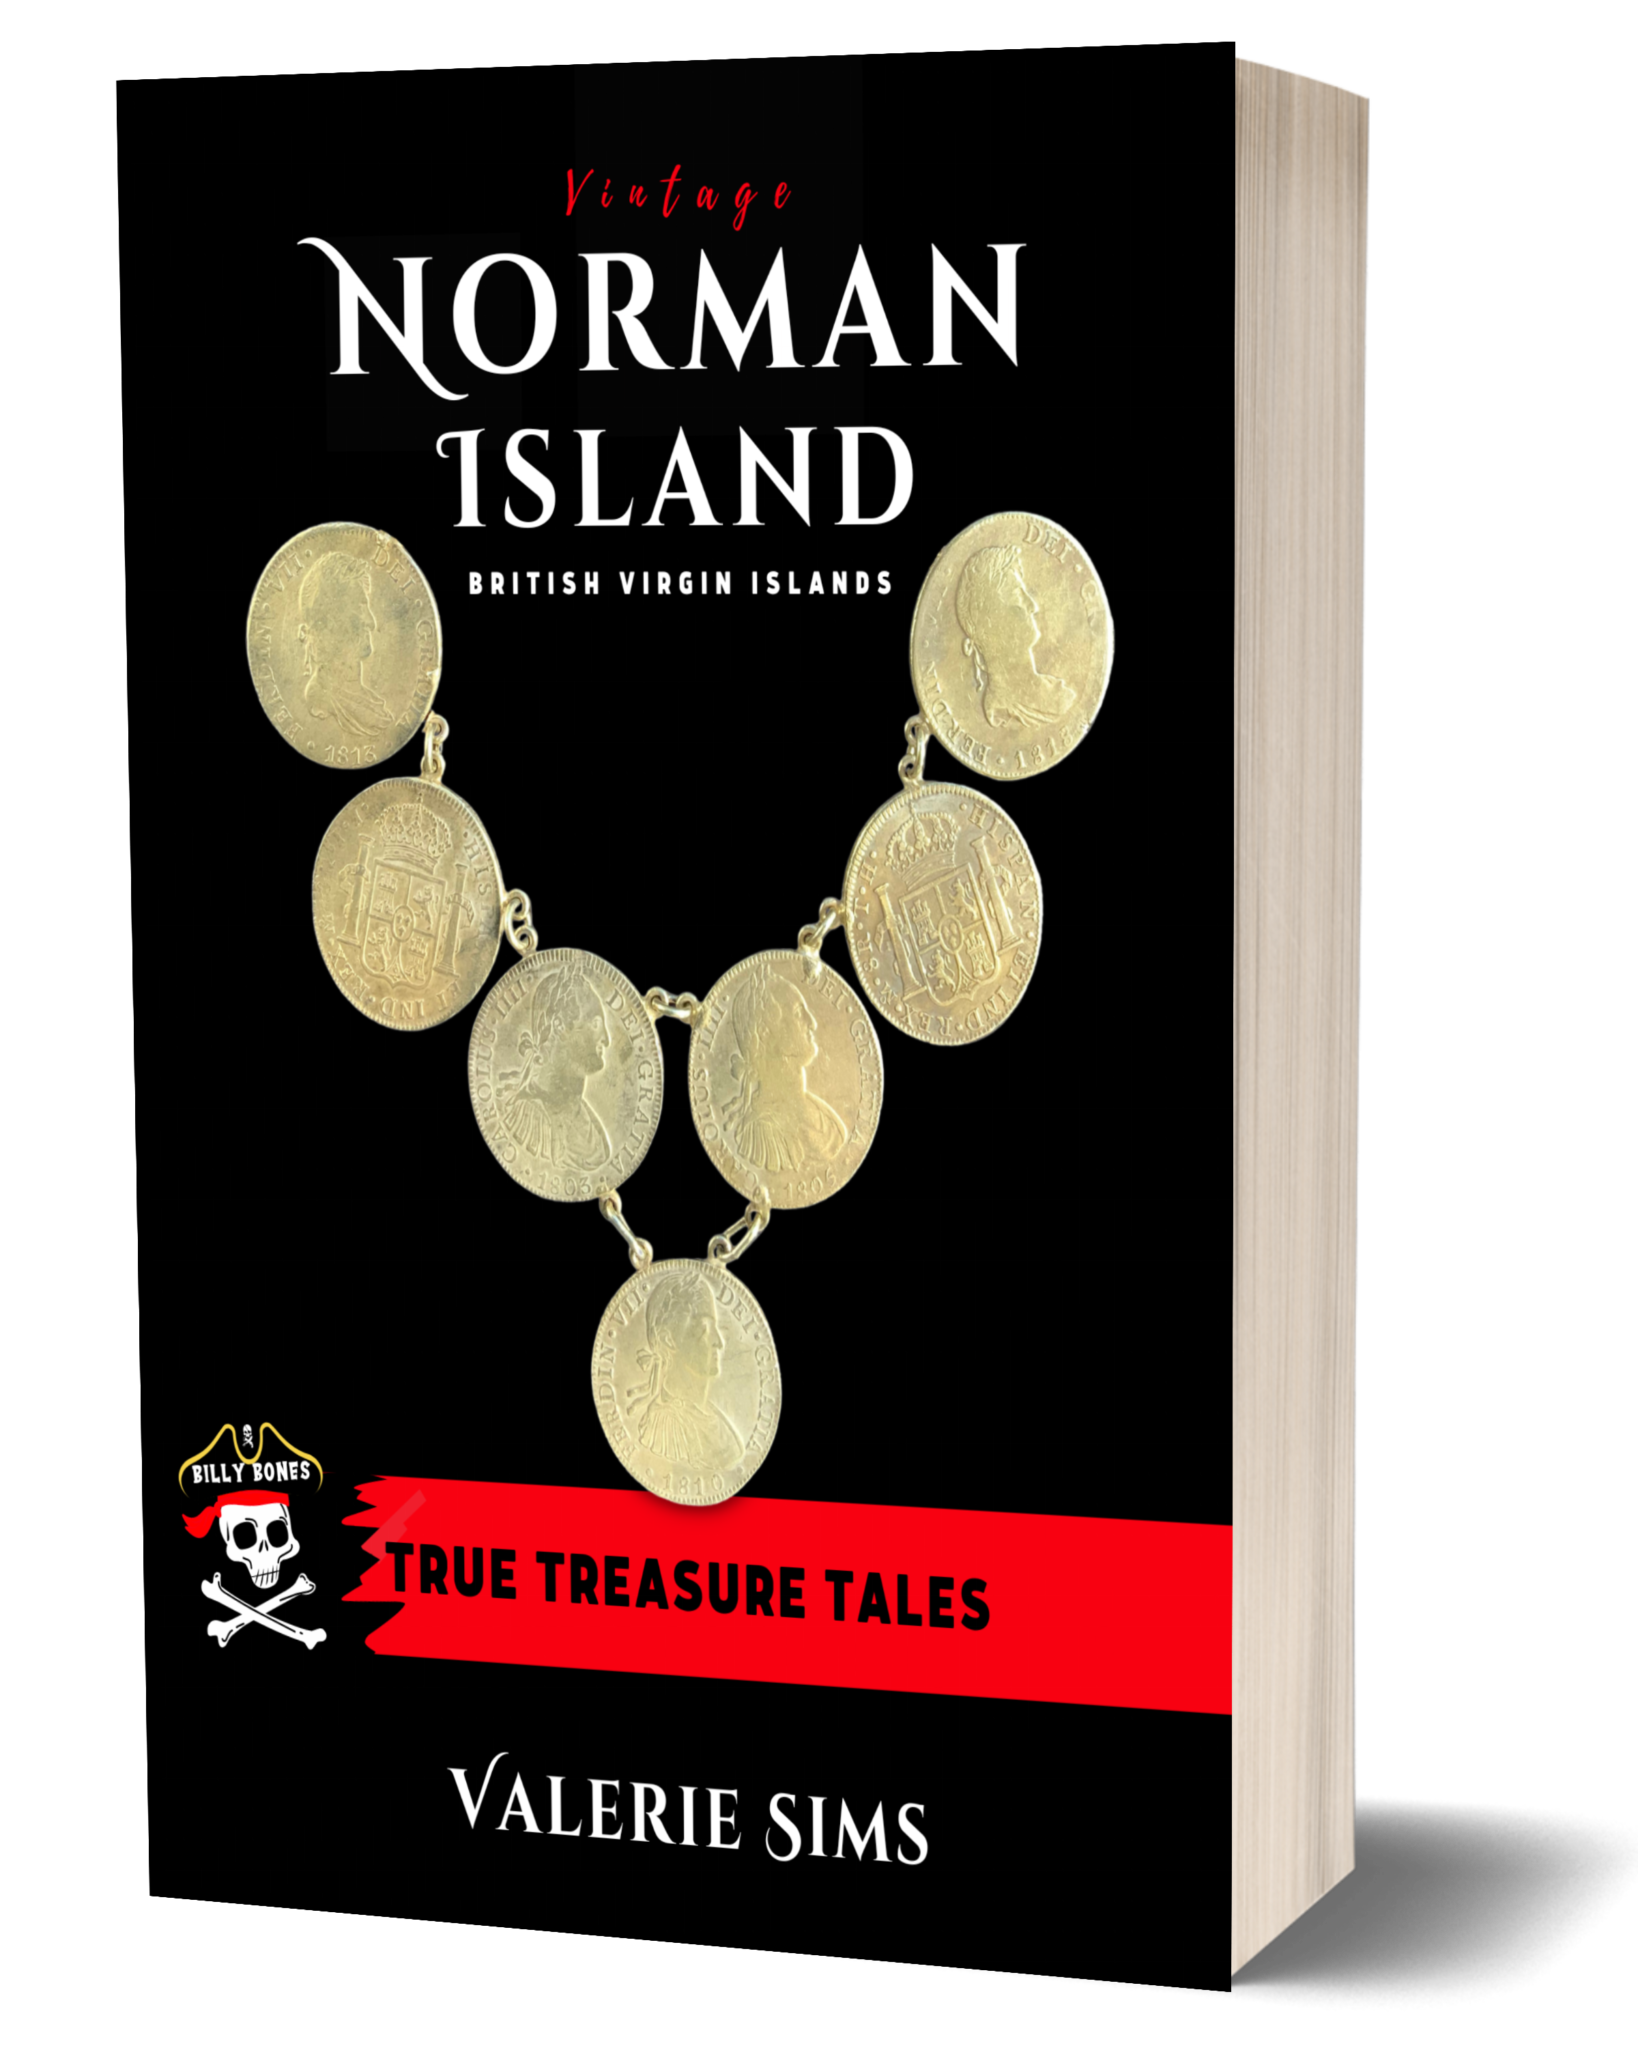 Vintage Norman Island by Valerie Sims